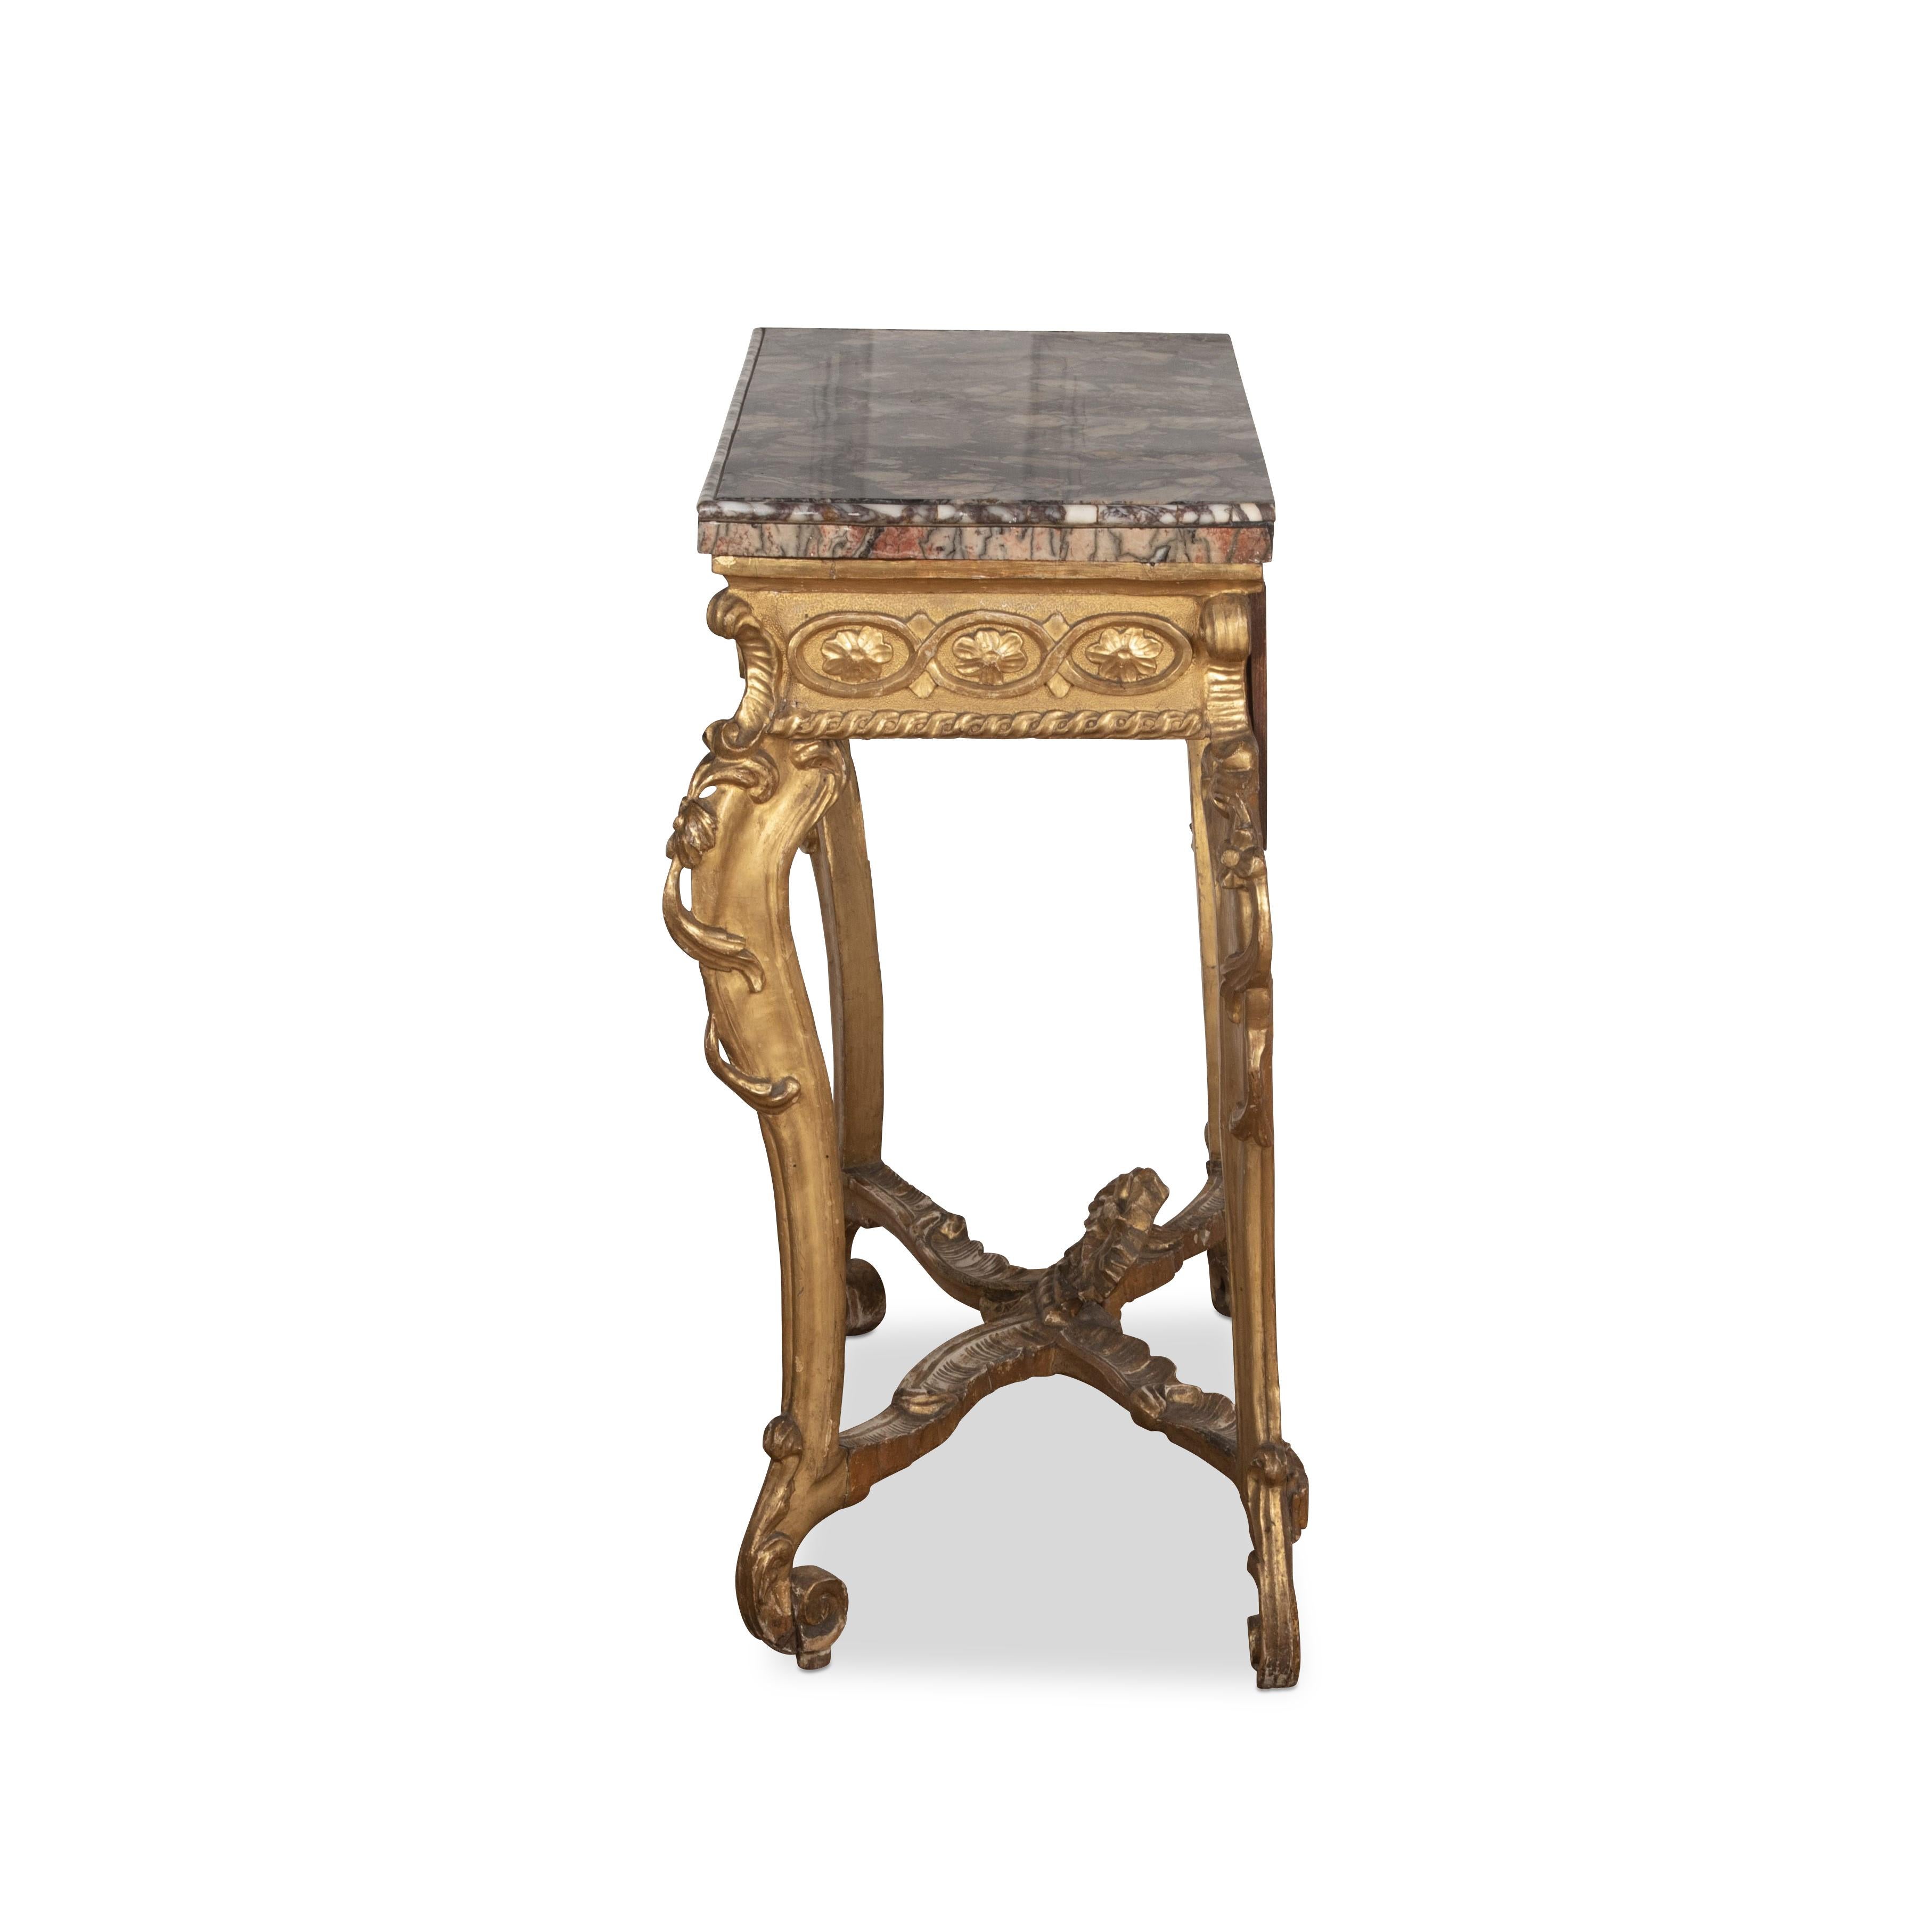 Italian C18th Giltwood & Marble Top Pier Table For Sale